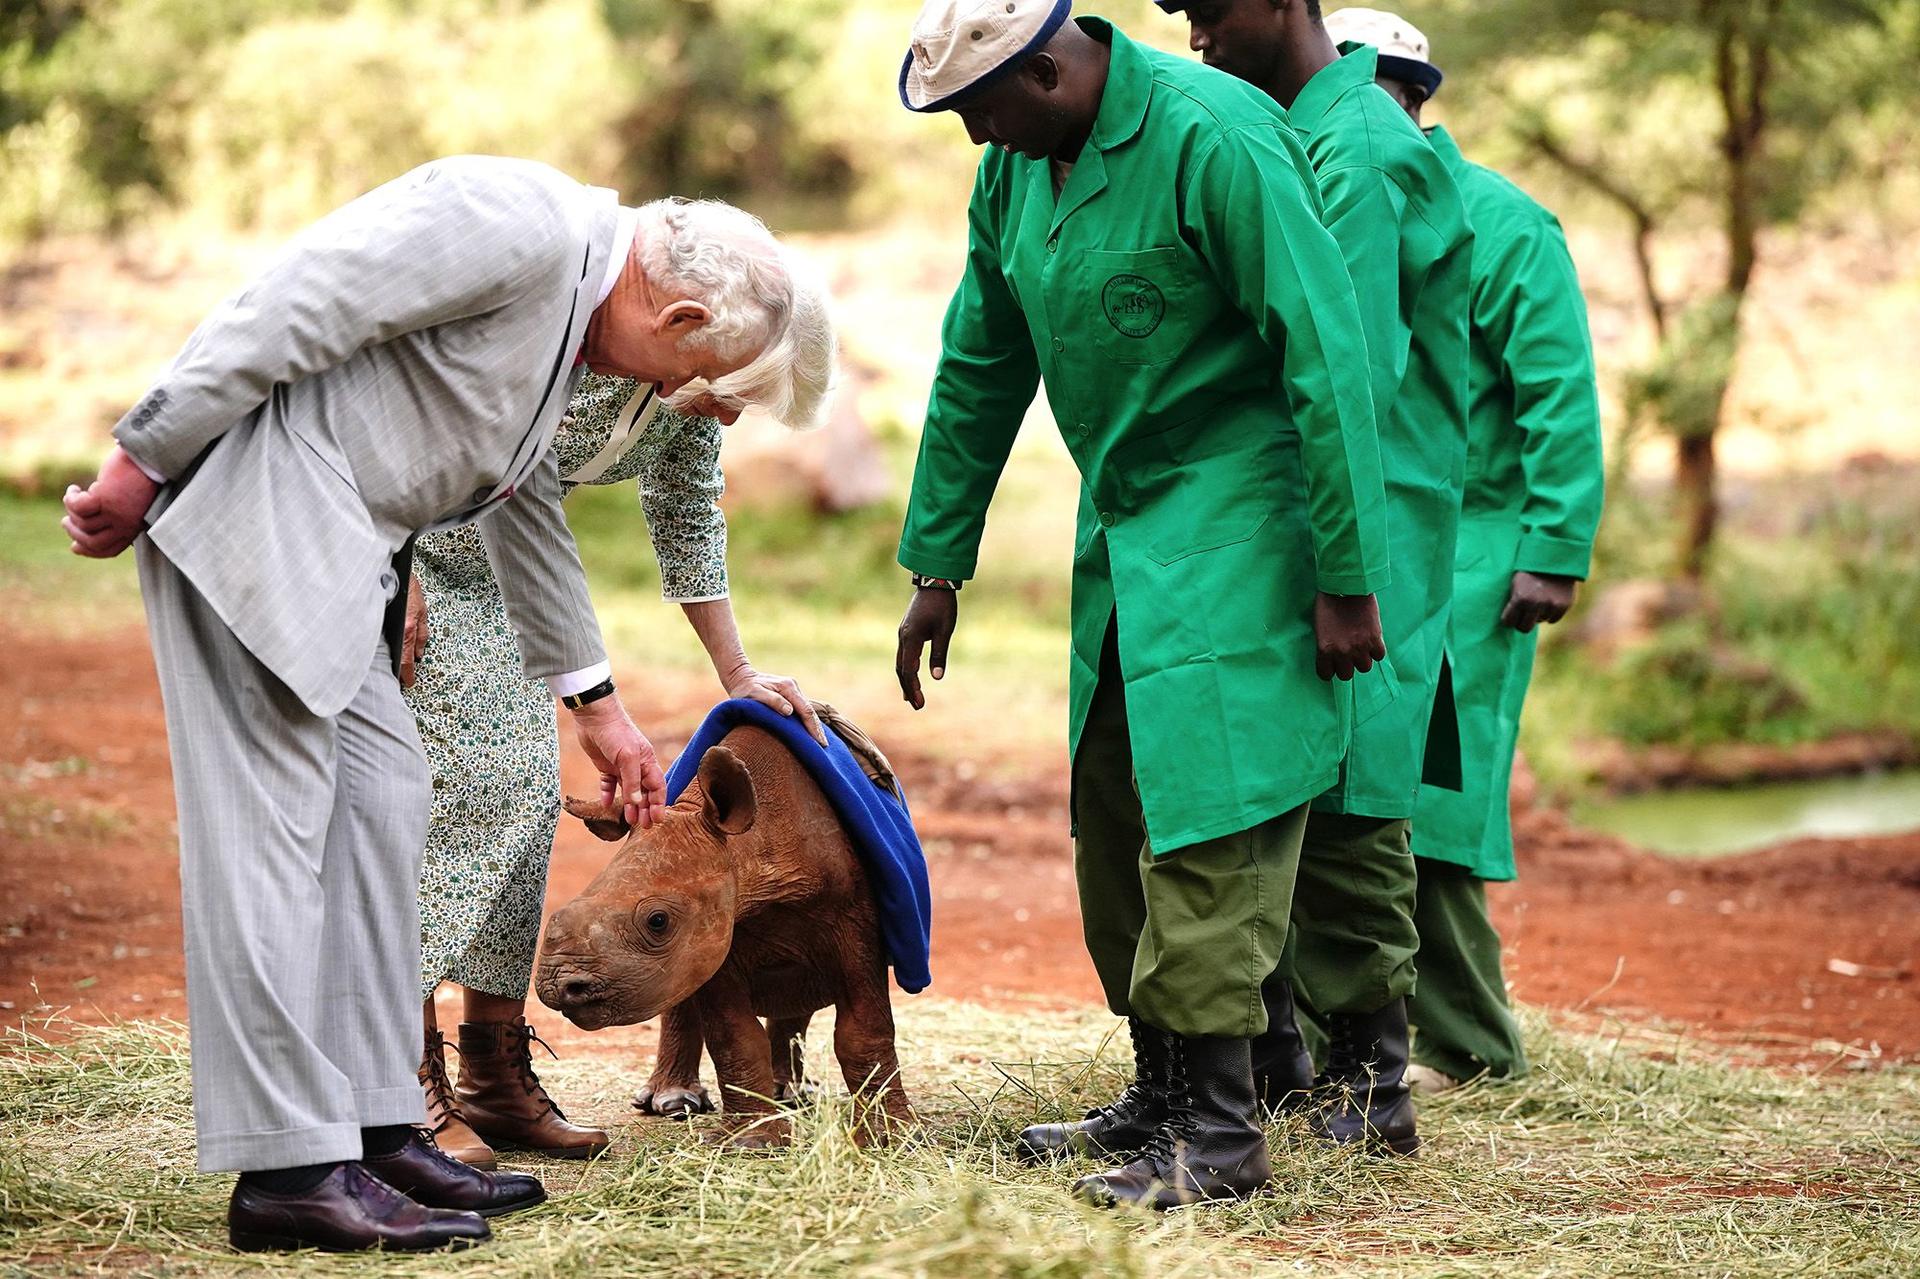 The royal couple toured the Sheldrick Wildlife Trust Elephant Orphanage in Nairobi National Park, to learn about the trust's work in the conservation and preservation of wildlife and protected areas across Kenya.